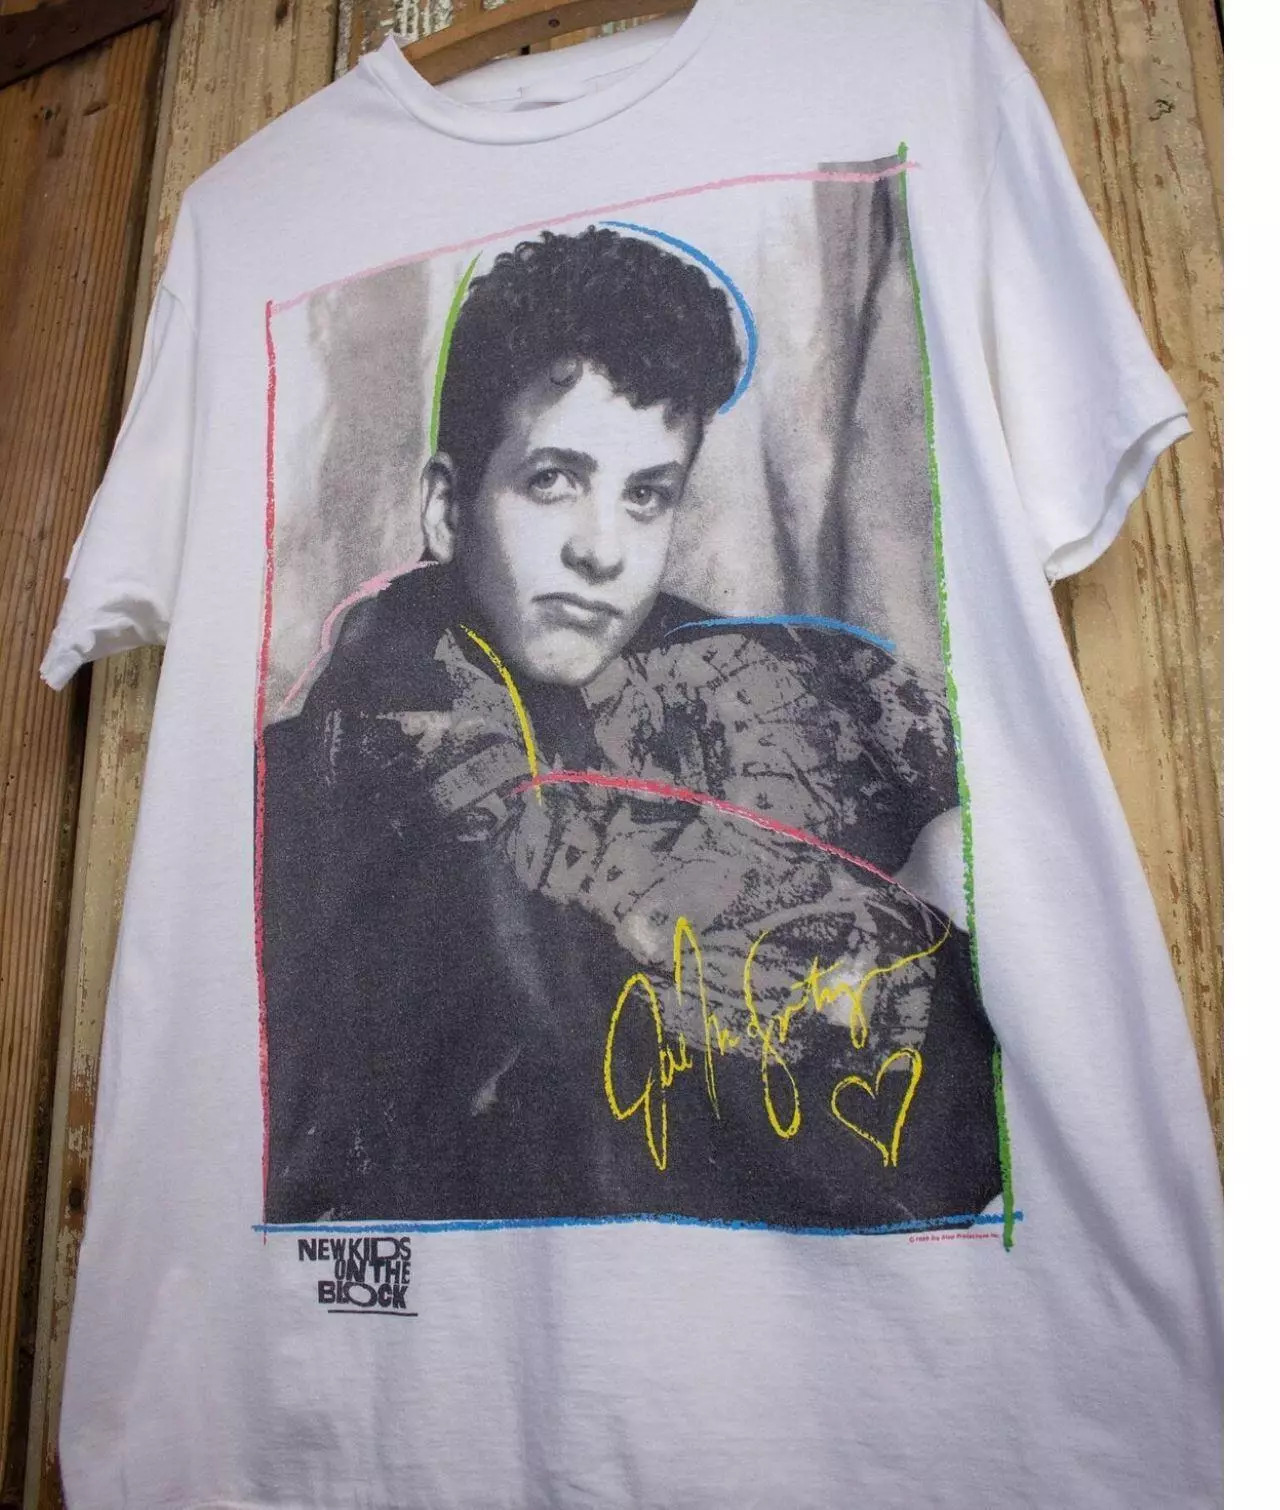 New Kids On The Block Joey McIntyre T Shirt Full Size S-5XL